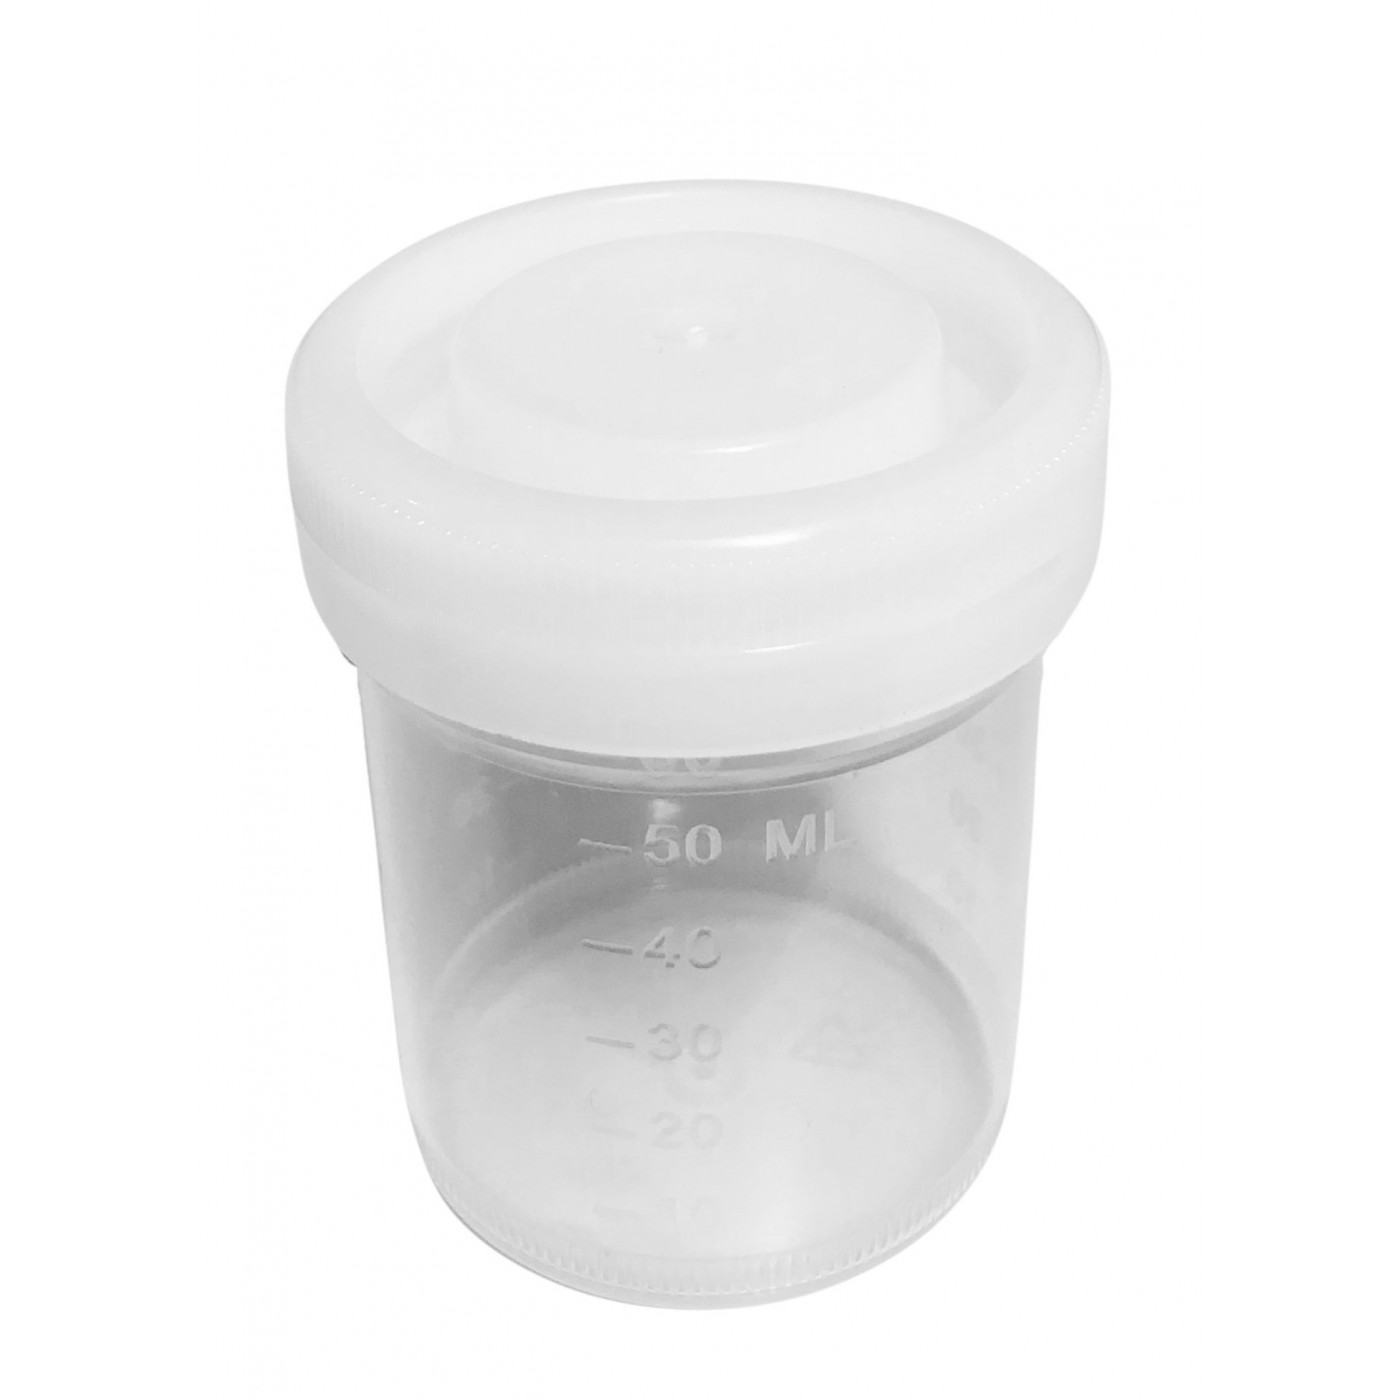 Set of 50 sample containers, 60 ml with white screw caps